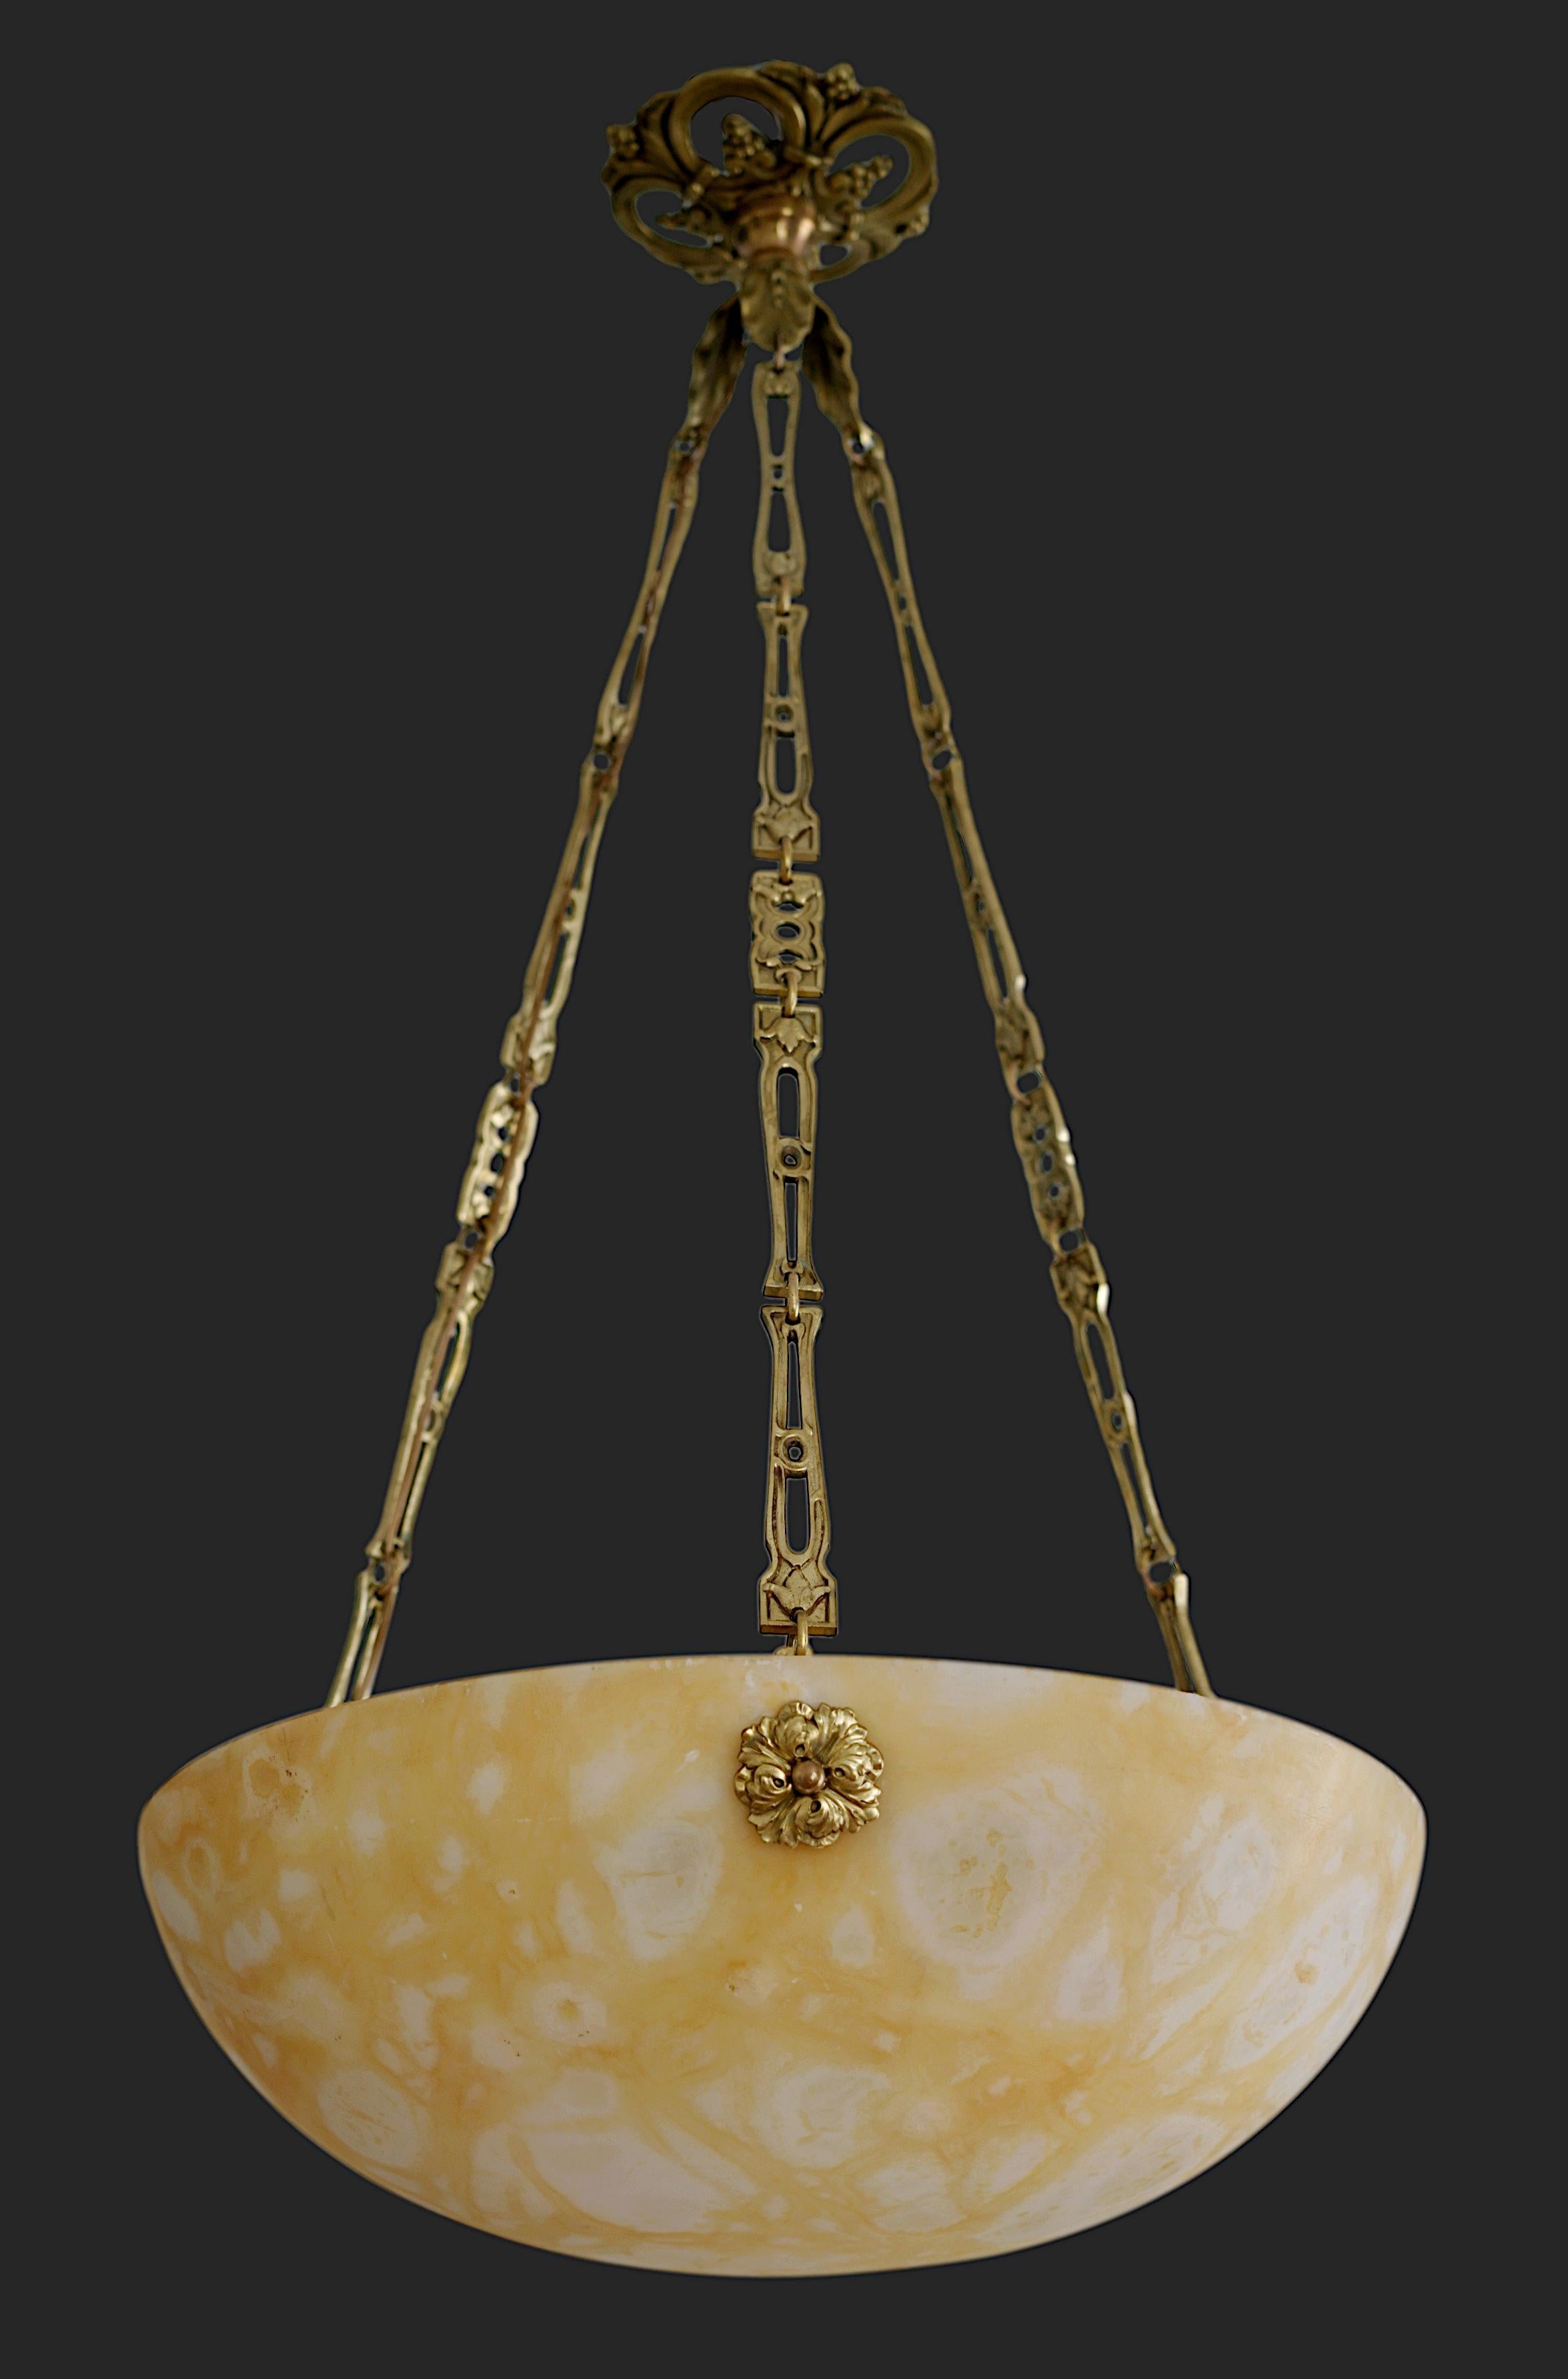 French Art Deco alabaster pendant chandelier, France, 1920s. The alabaster here is of exceptional quality. It shows cells, ranging from light beige to dark brown, arranged over the entire surface. Old alabaster cannot be compared to new ones. Old